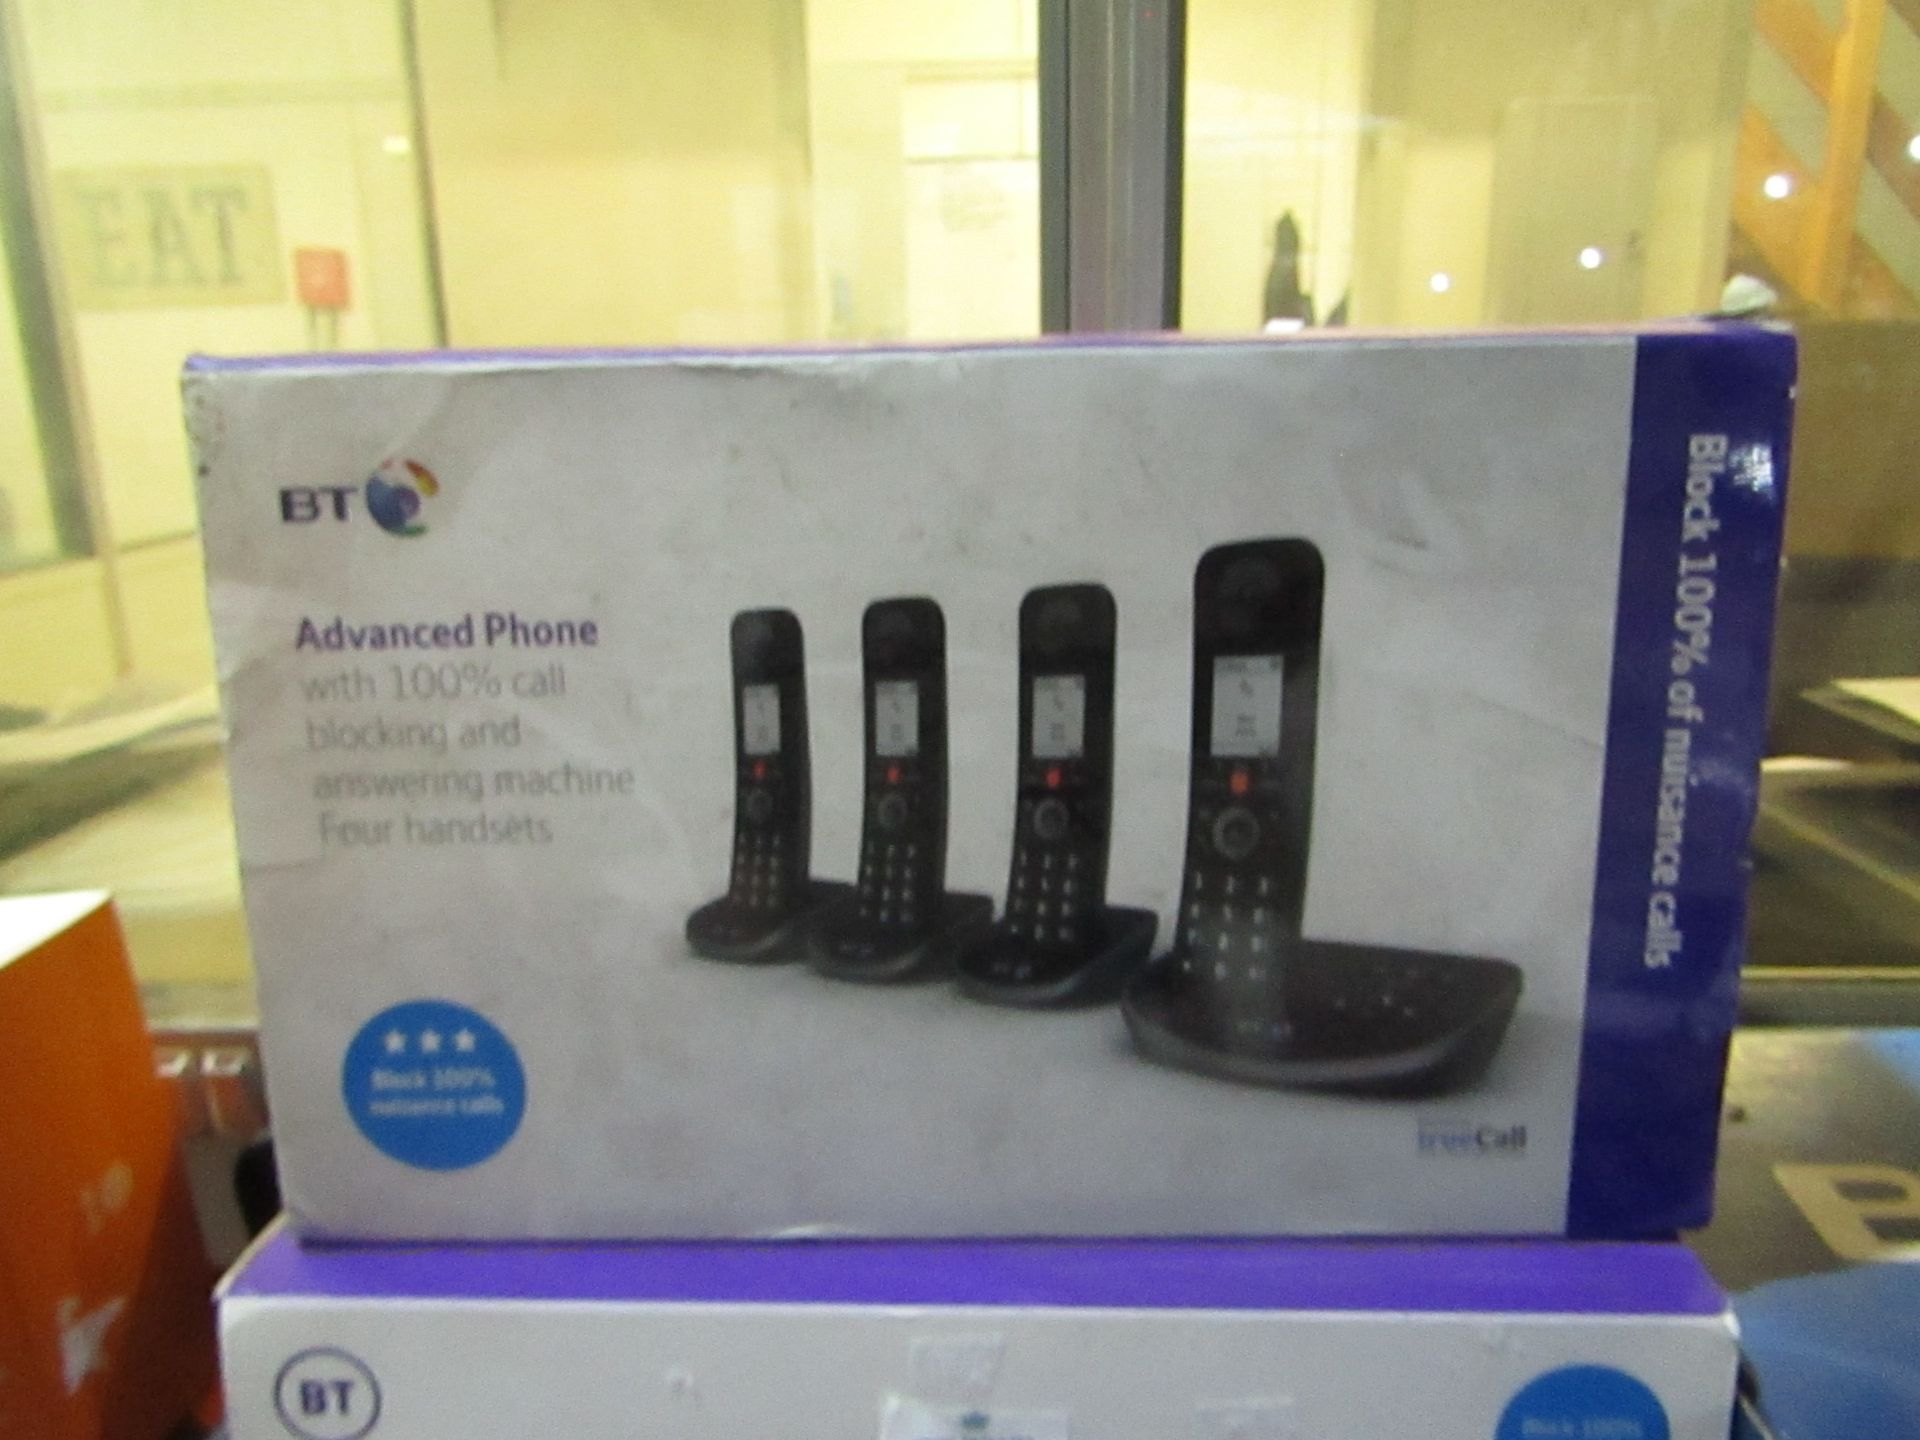 A Set of 4 BT Advanced Cordless Phones with call blocking, boxed and unchecked